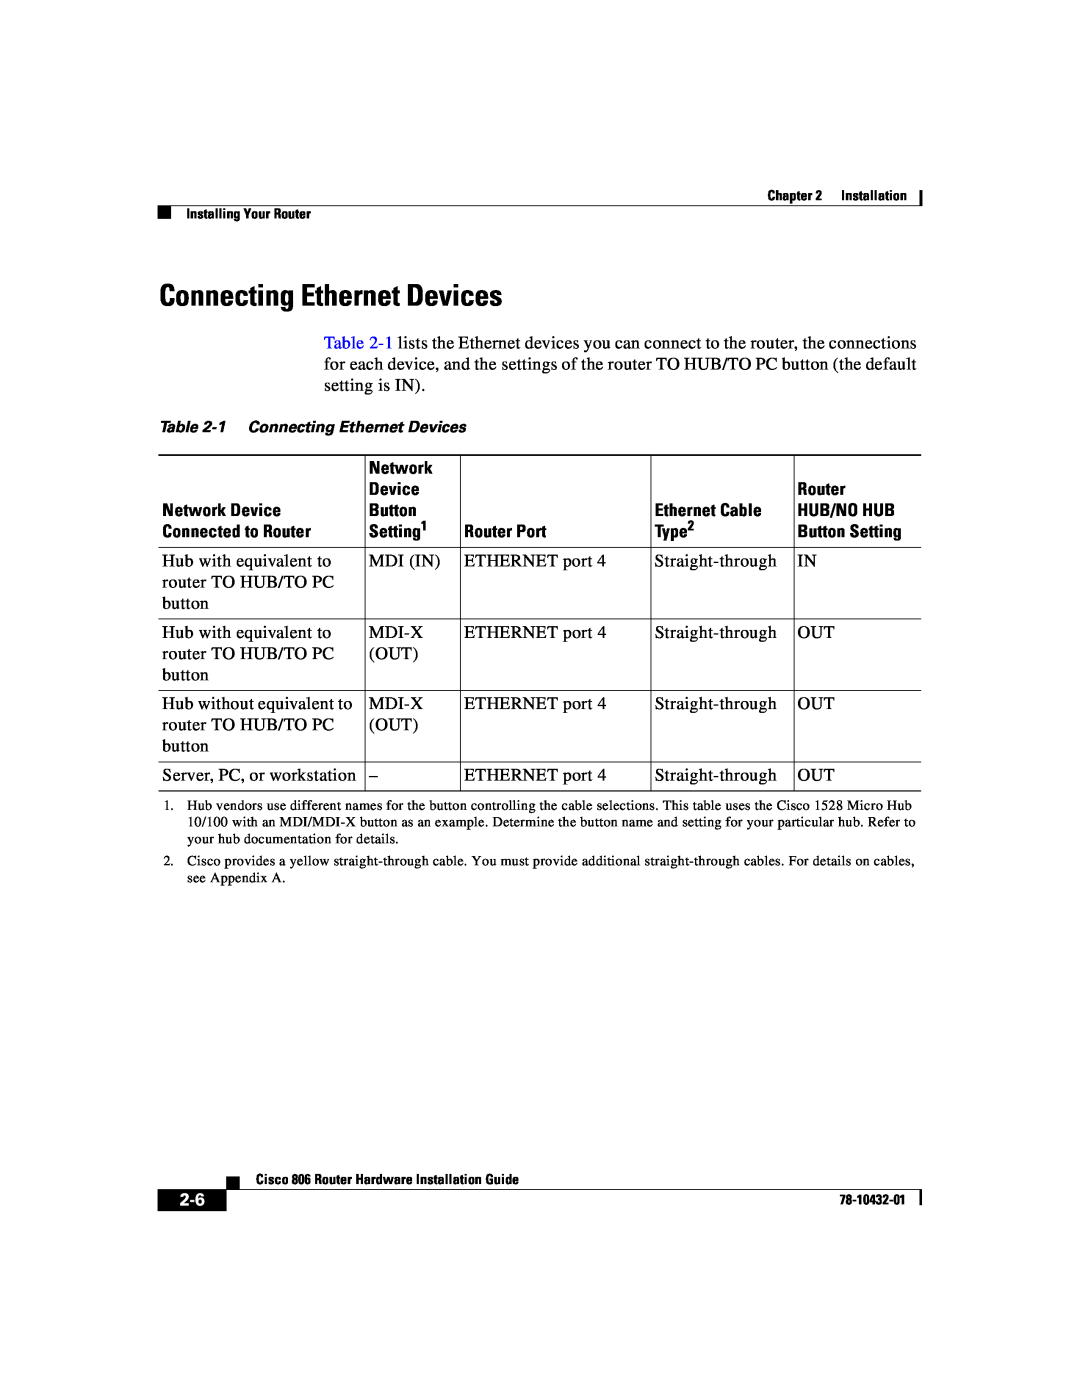 Cisco Systems 806 manual Connecting Ethernet Devices 